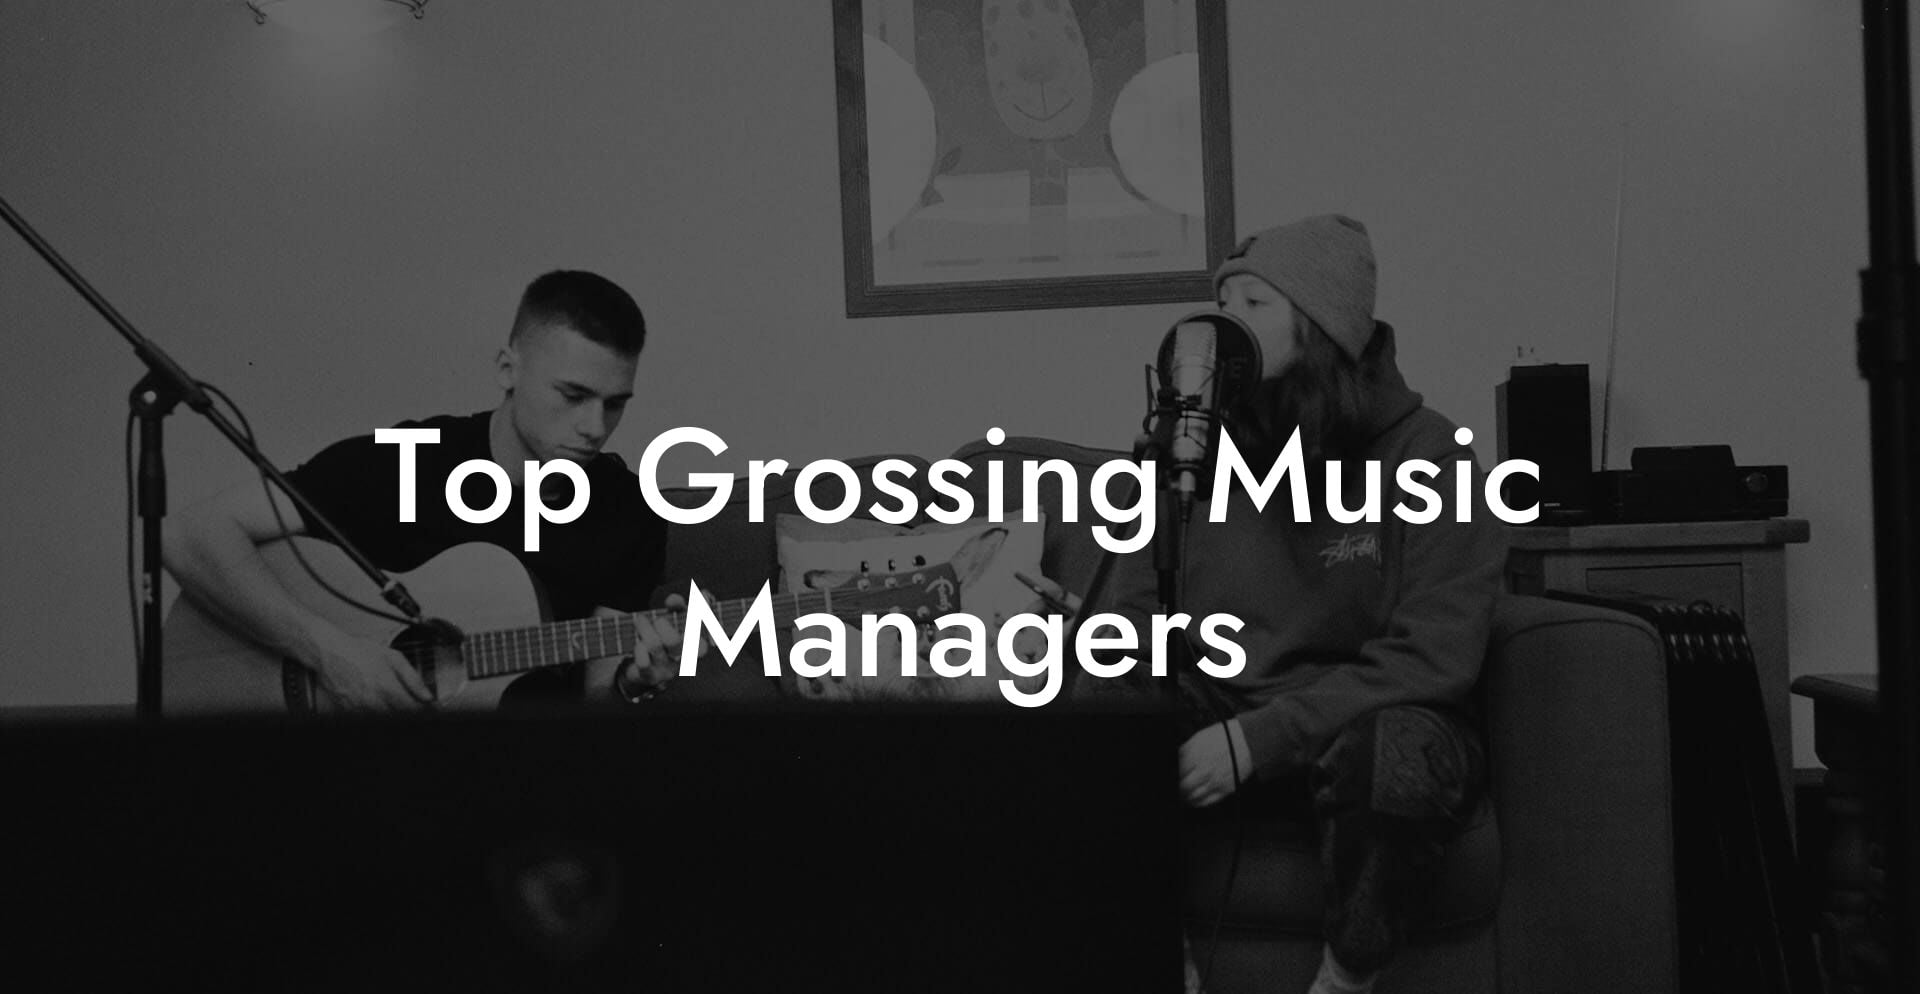 Top Grossing Music Managers